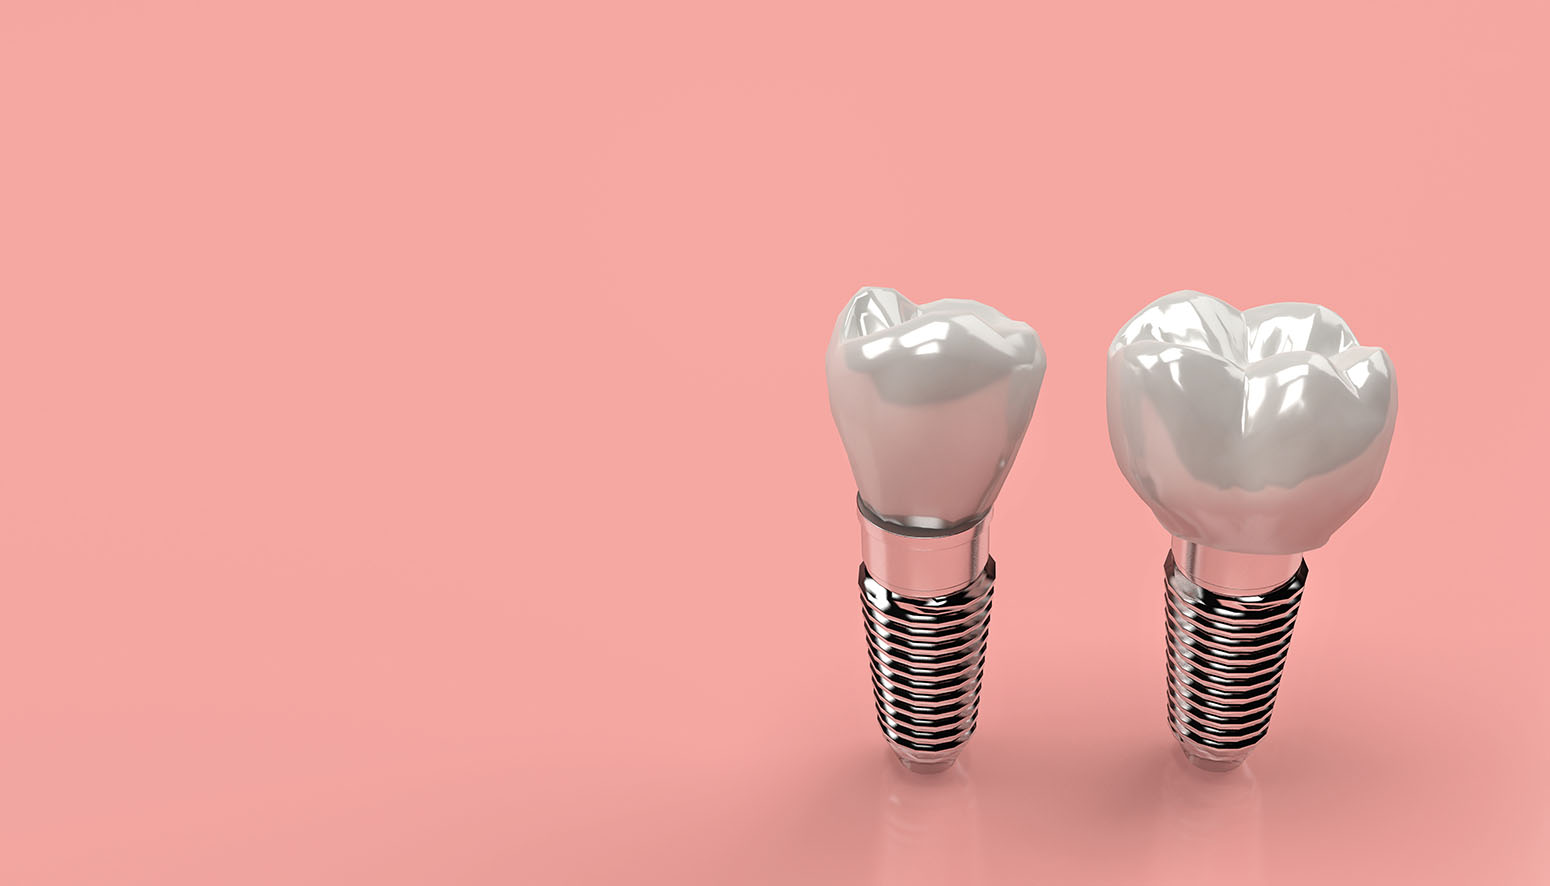 Price of Dental Implants - How Much Do They Cost?